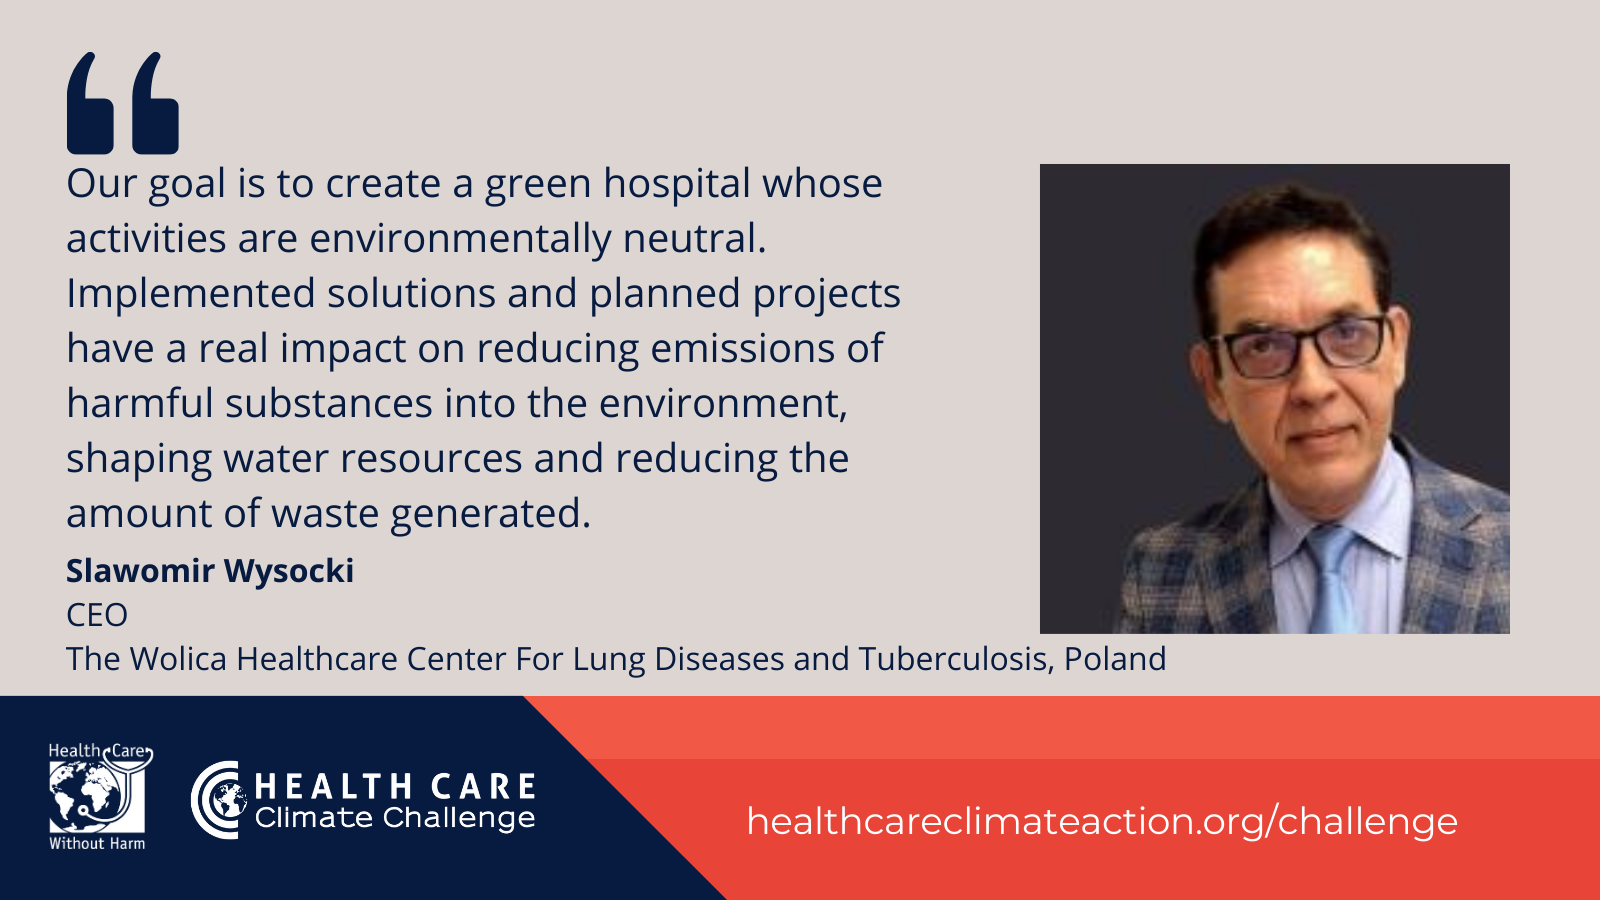 Wolica Healthcare Center For Lung Diseases and Tuberculosis - Poland